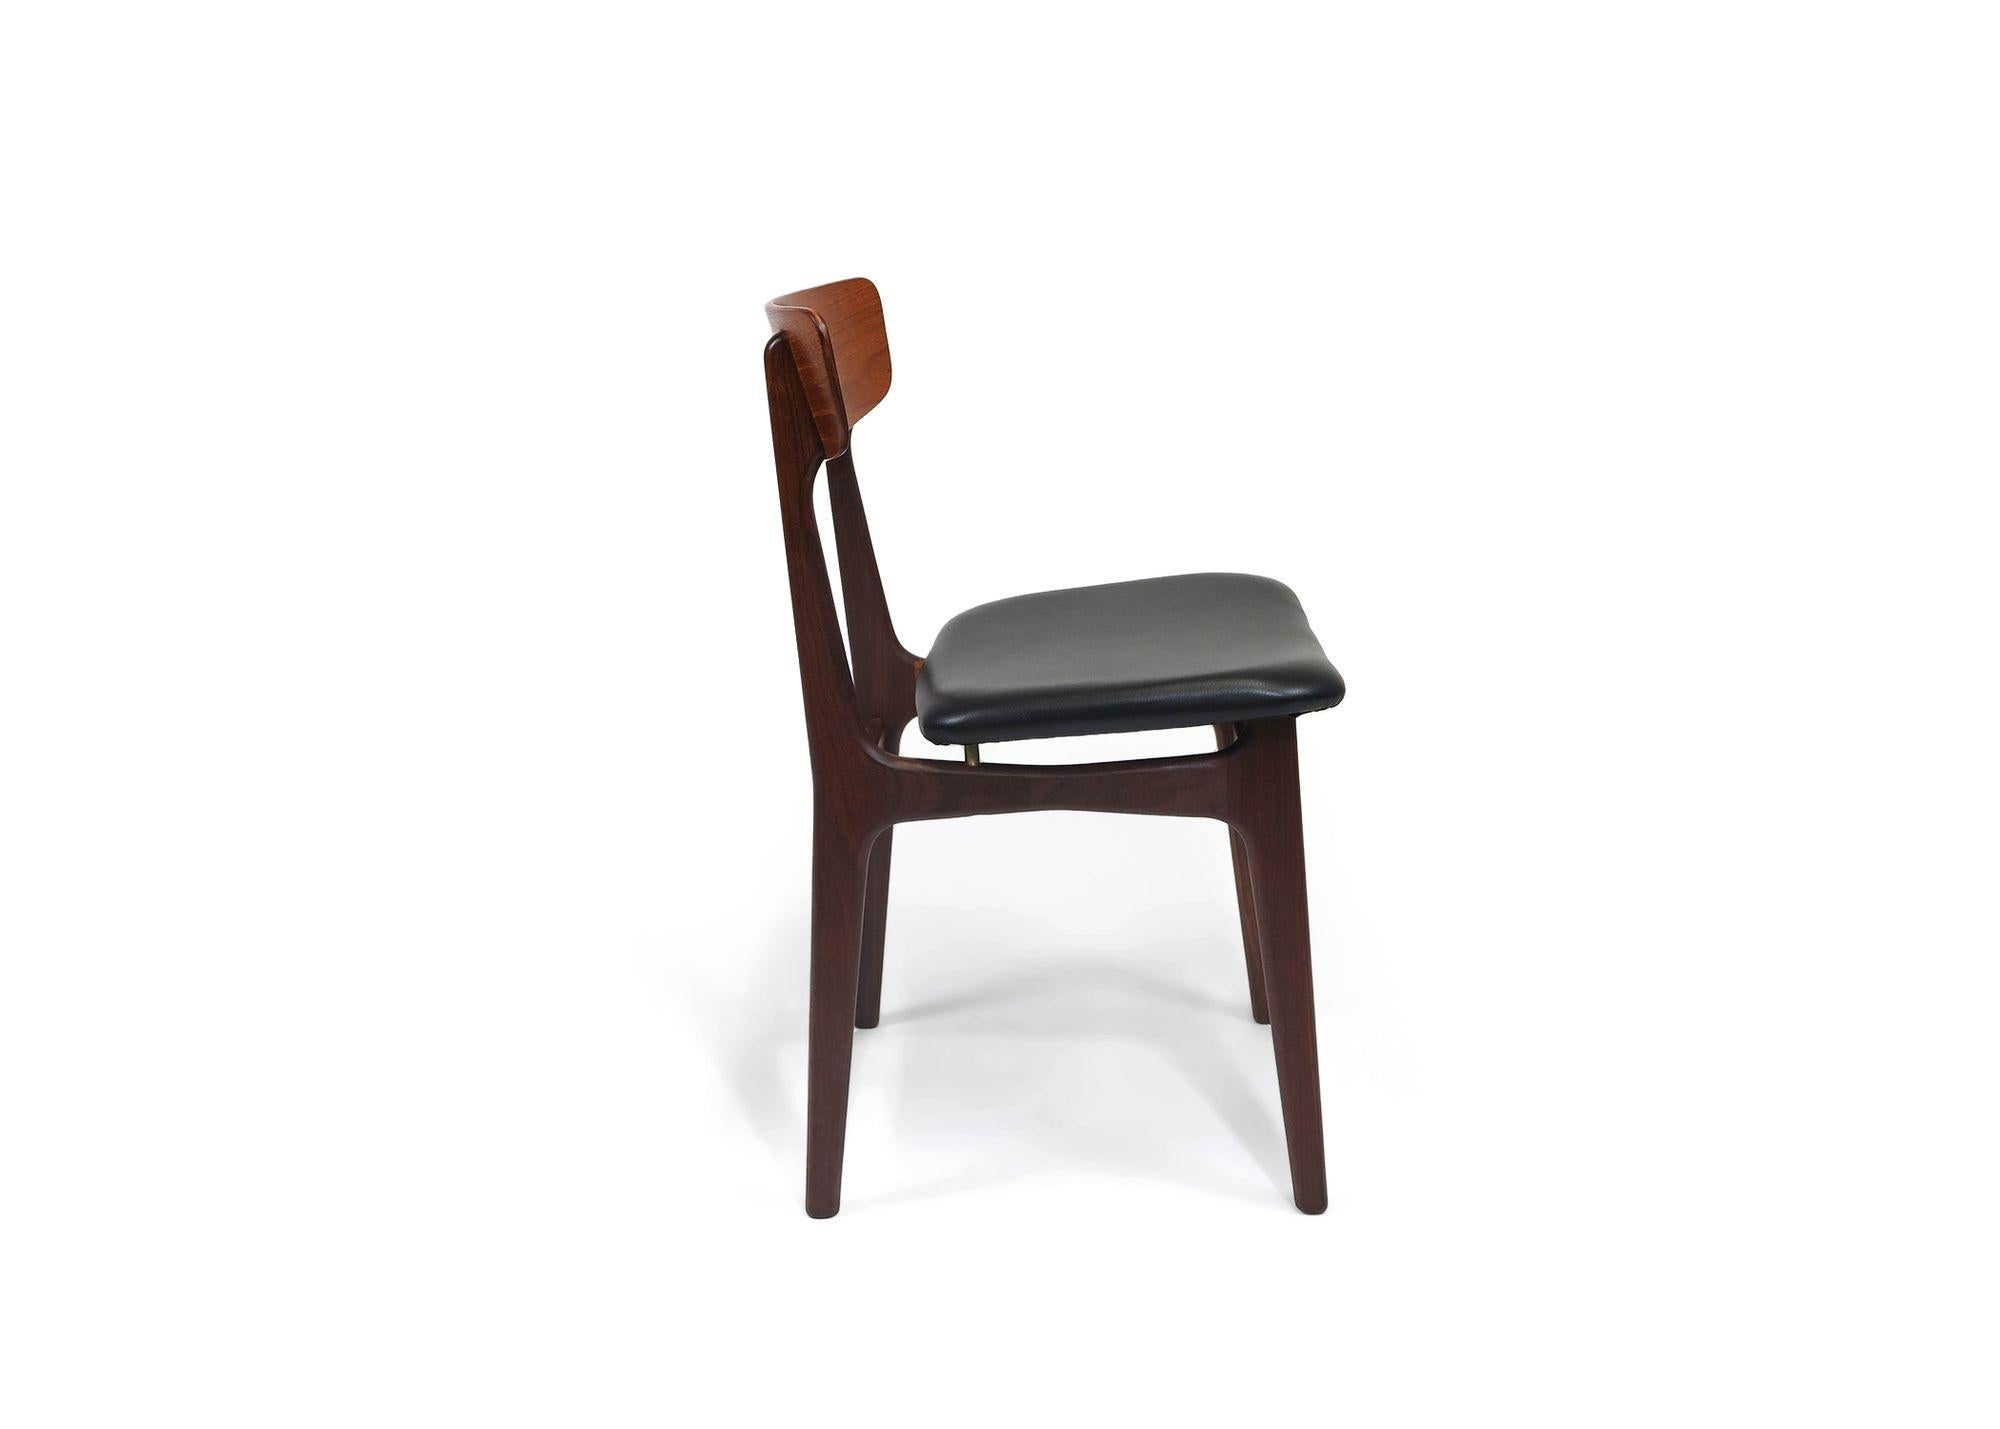 Twelve Danish Teak Dining Chairs in Black Leather In Excellent Condition For Sale In Oakland, CA